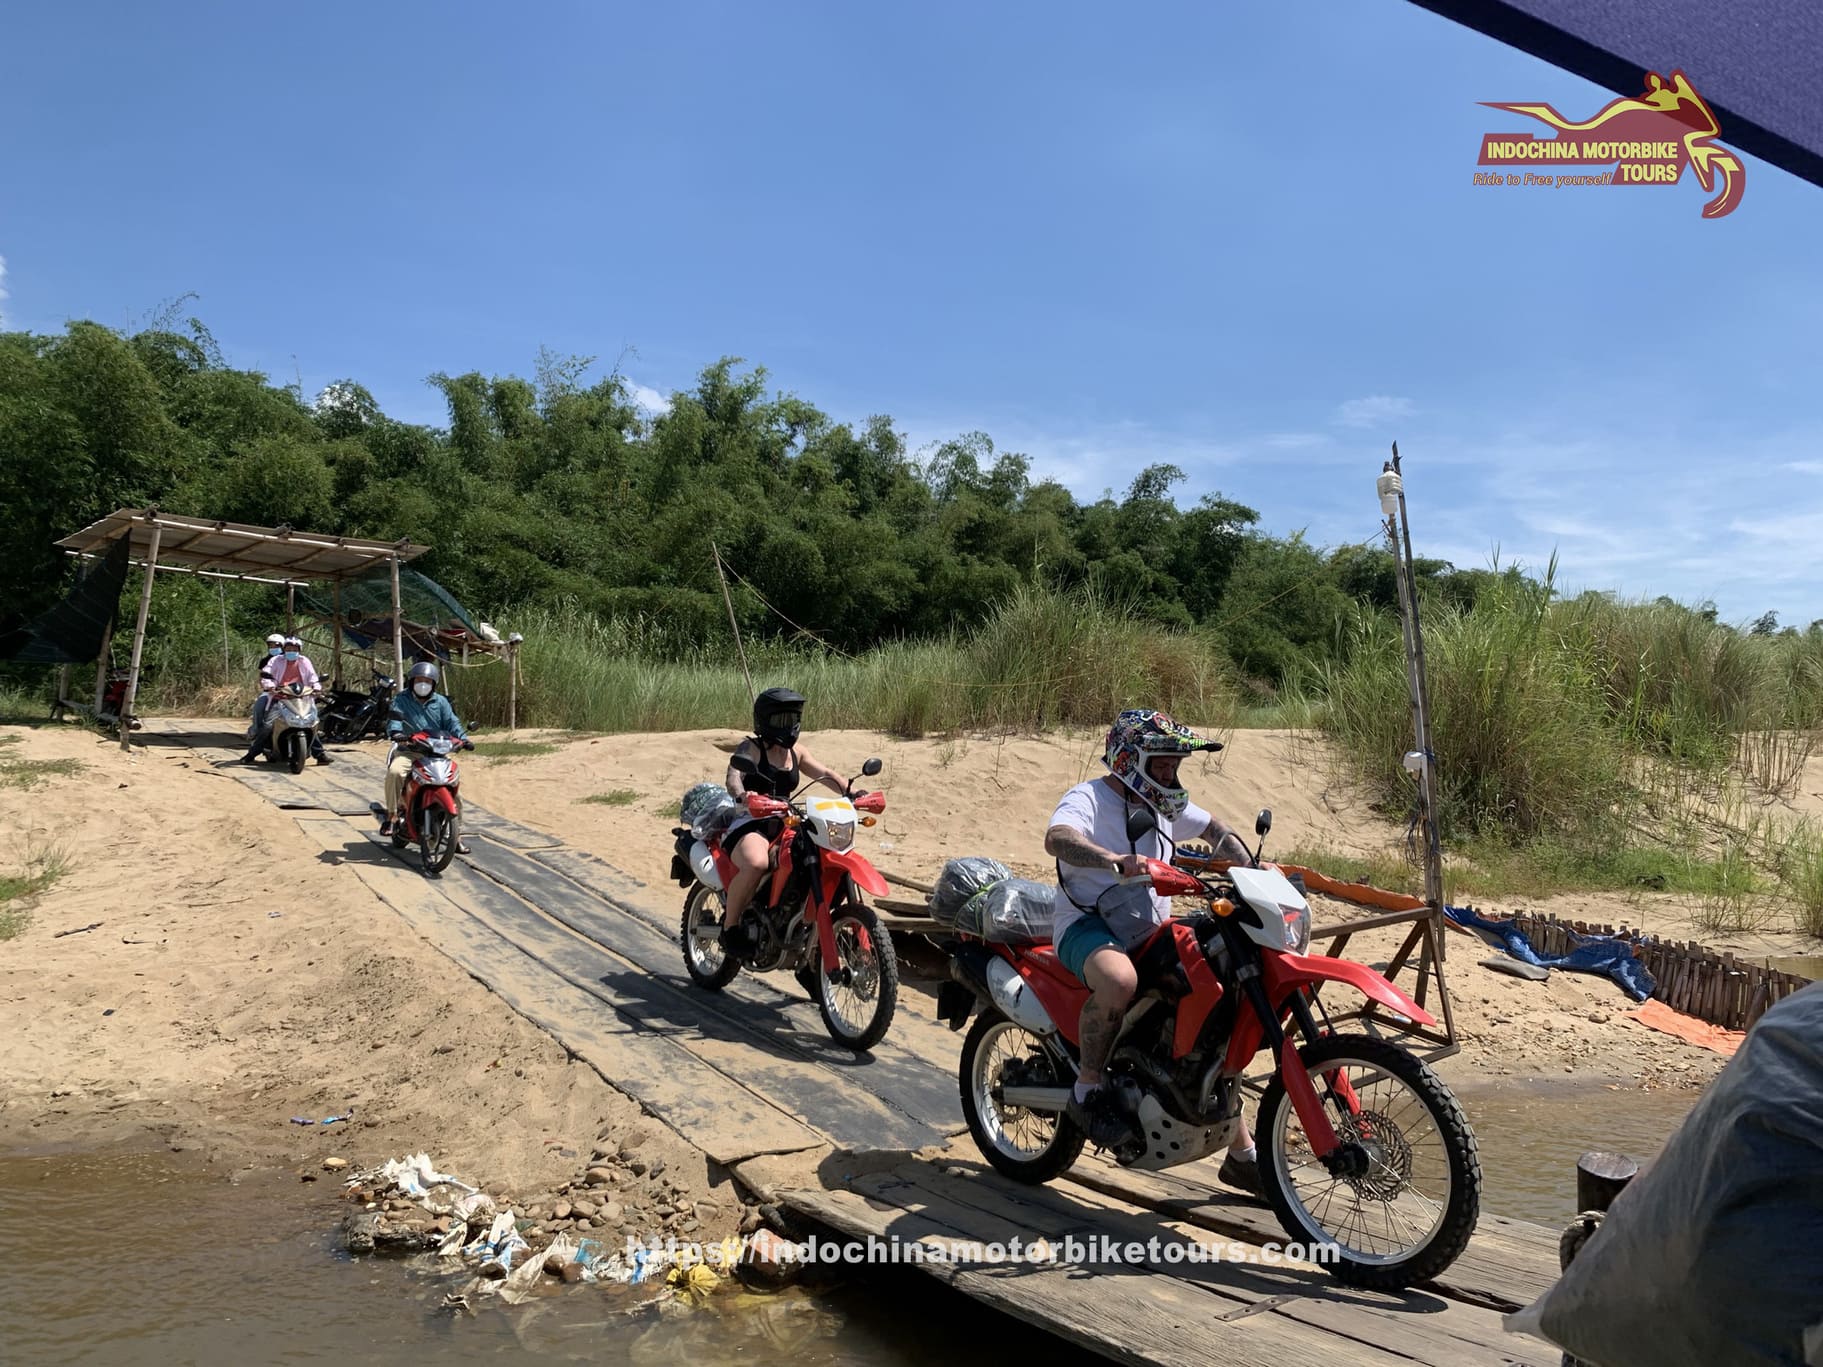 VIETNAM CENTRAL OFFROAD MOTORBIKE TOUR FROM HOI AN TO DA LAT, NHA TRANG